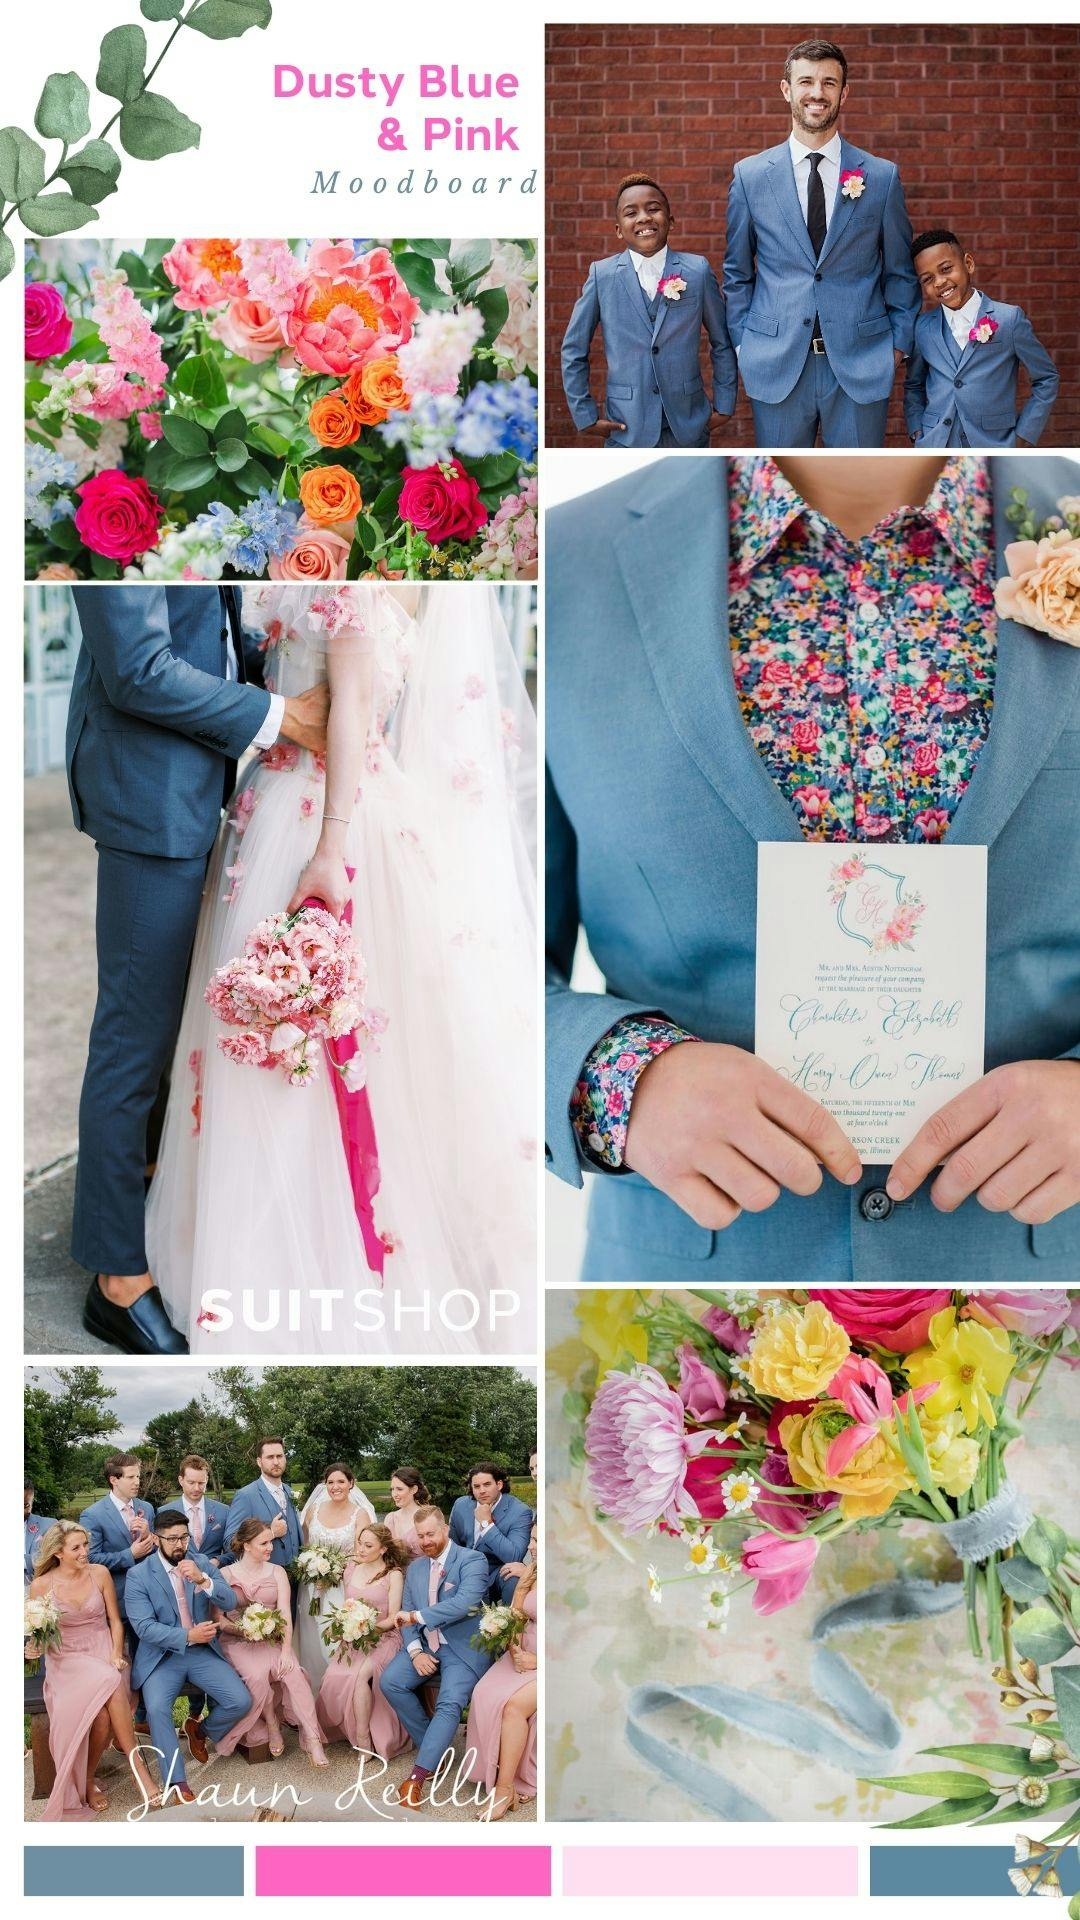 Cotton candy trendy blue and pink wedding color combination for spring with light blue groomsman suits, floral wedding shirt, hot pink bouquets, and blush bridesmaid dresses.